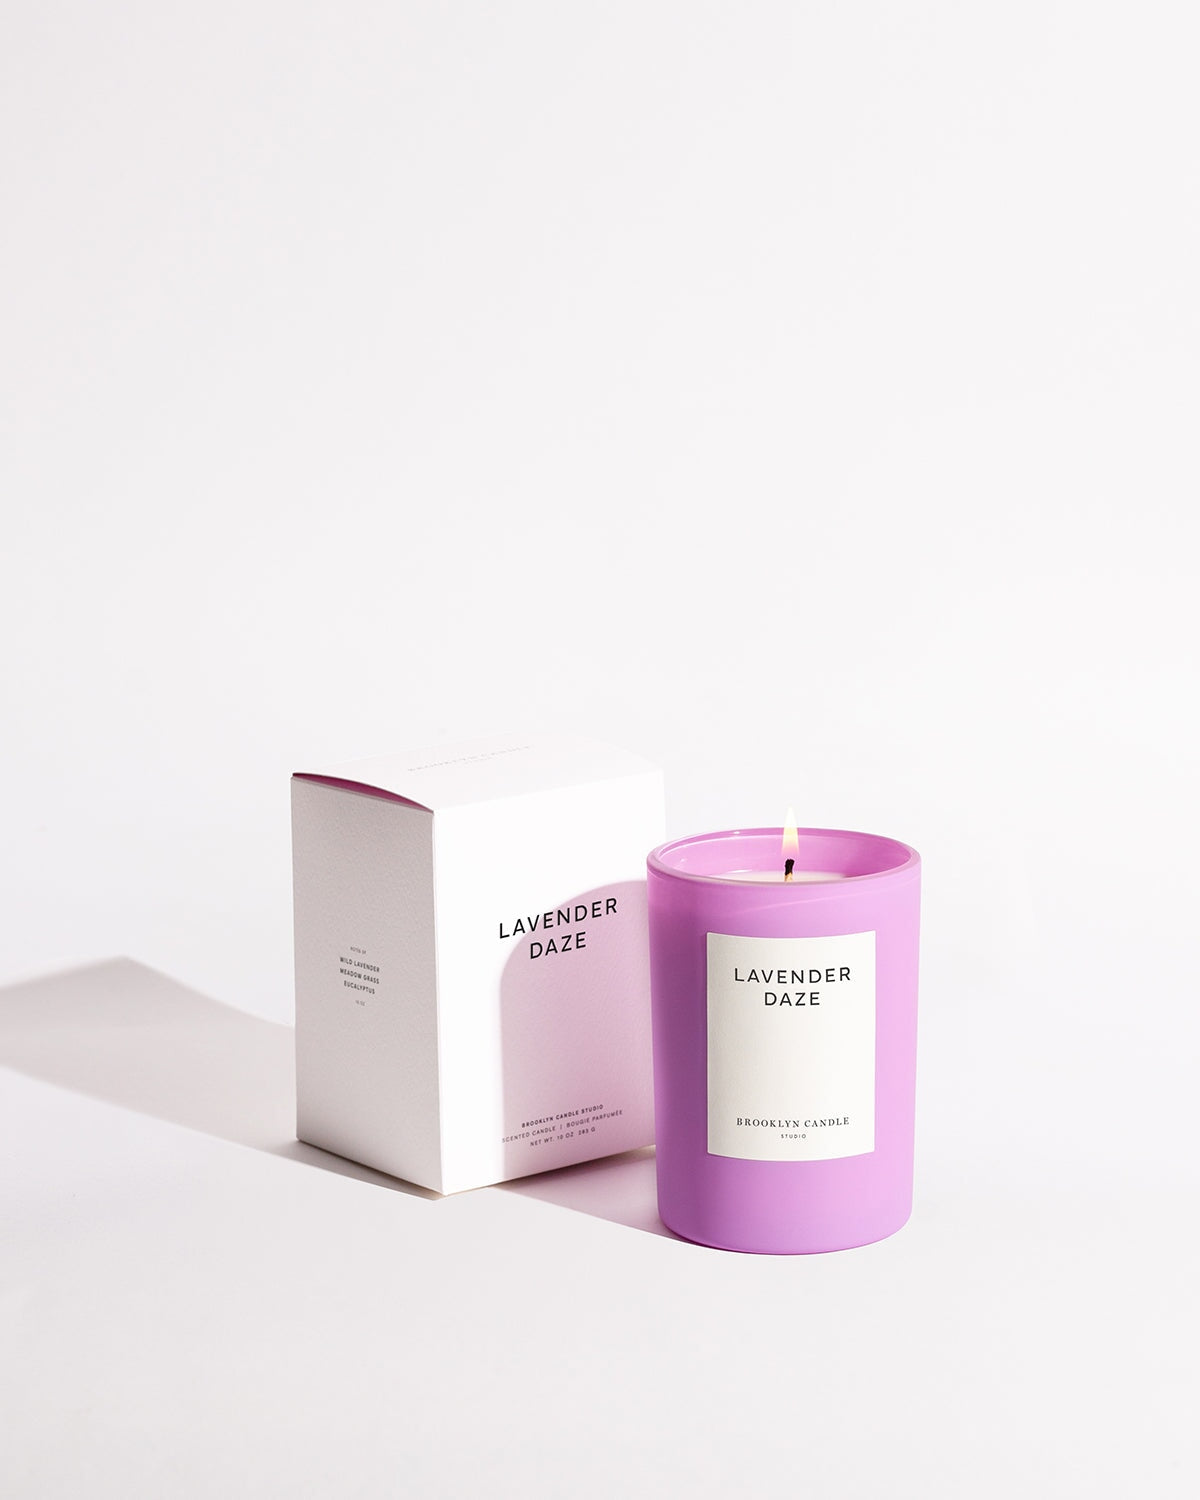 Lavender Daze Spring Edition Candle Lilac Haze Collection Brooklyn Candle Studio 